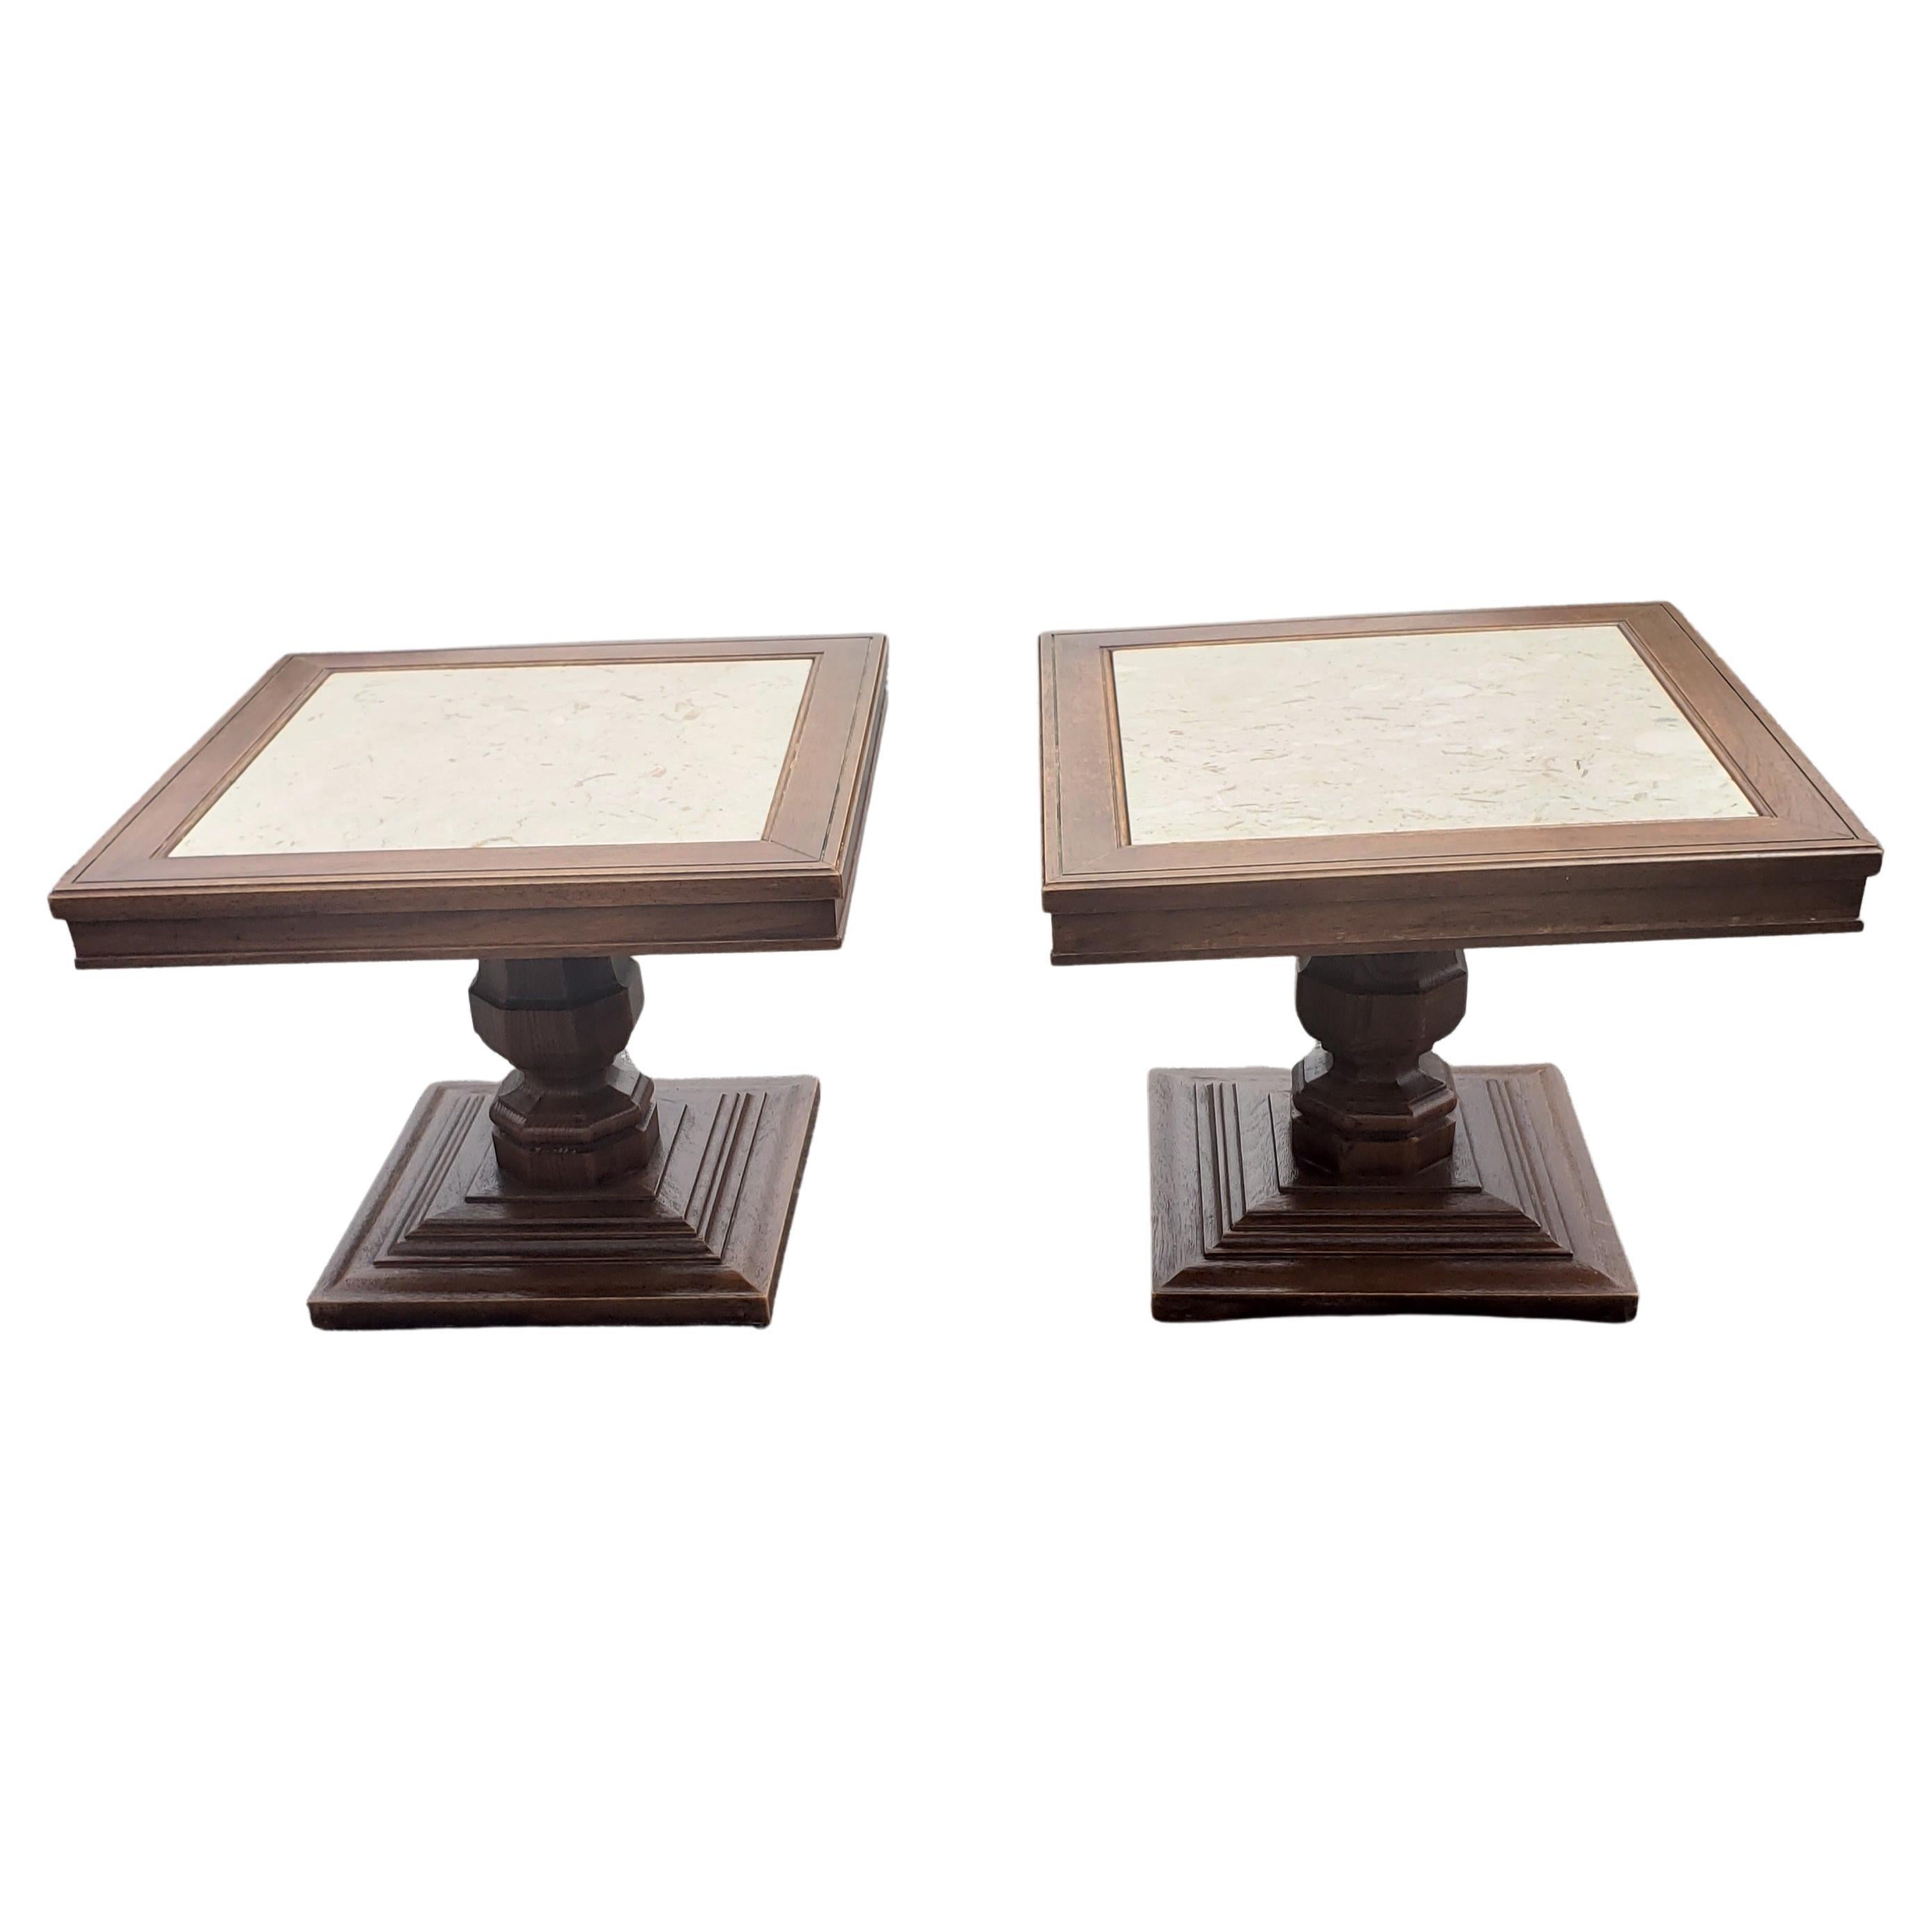 1960s Italian Pedestal Oak Side Tables with Marble Top Inserts, a Pair For Sale 1